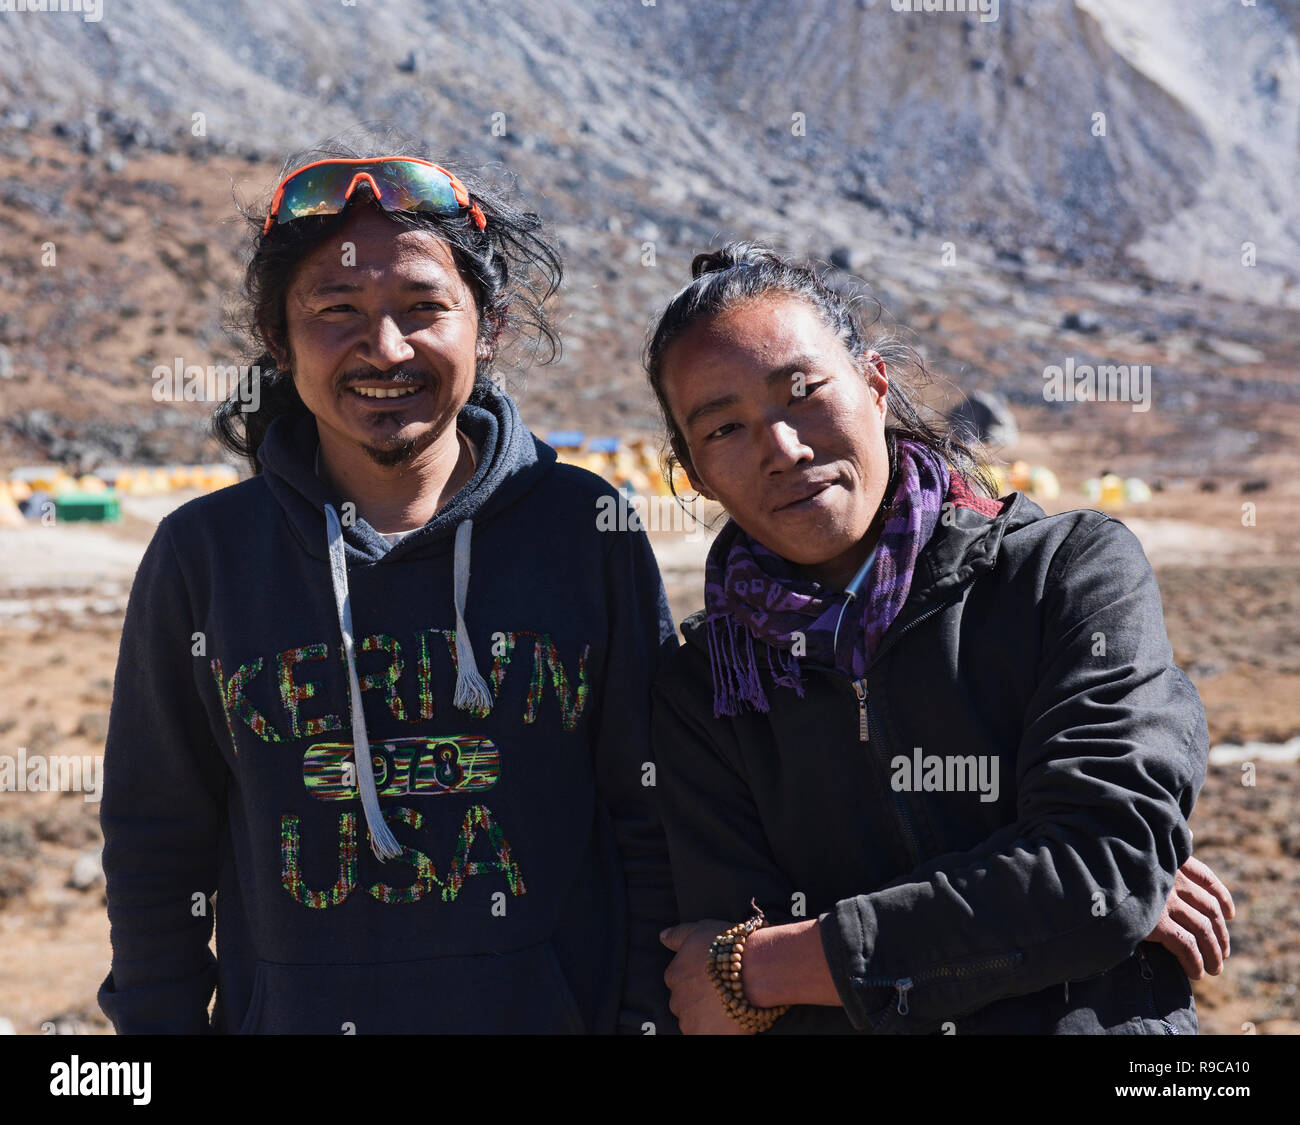 Porters in the Khumbu Valley, Khumjung, Nepal Stock Photo